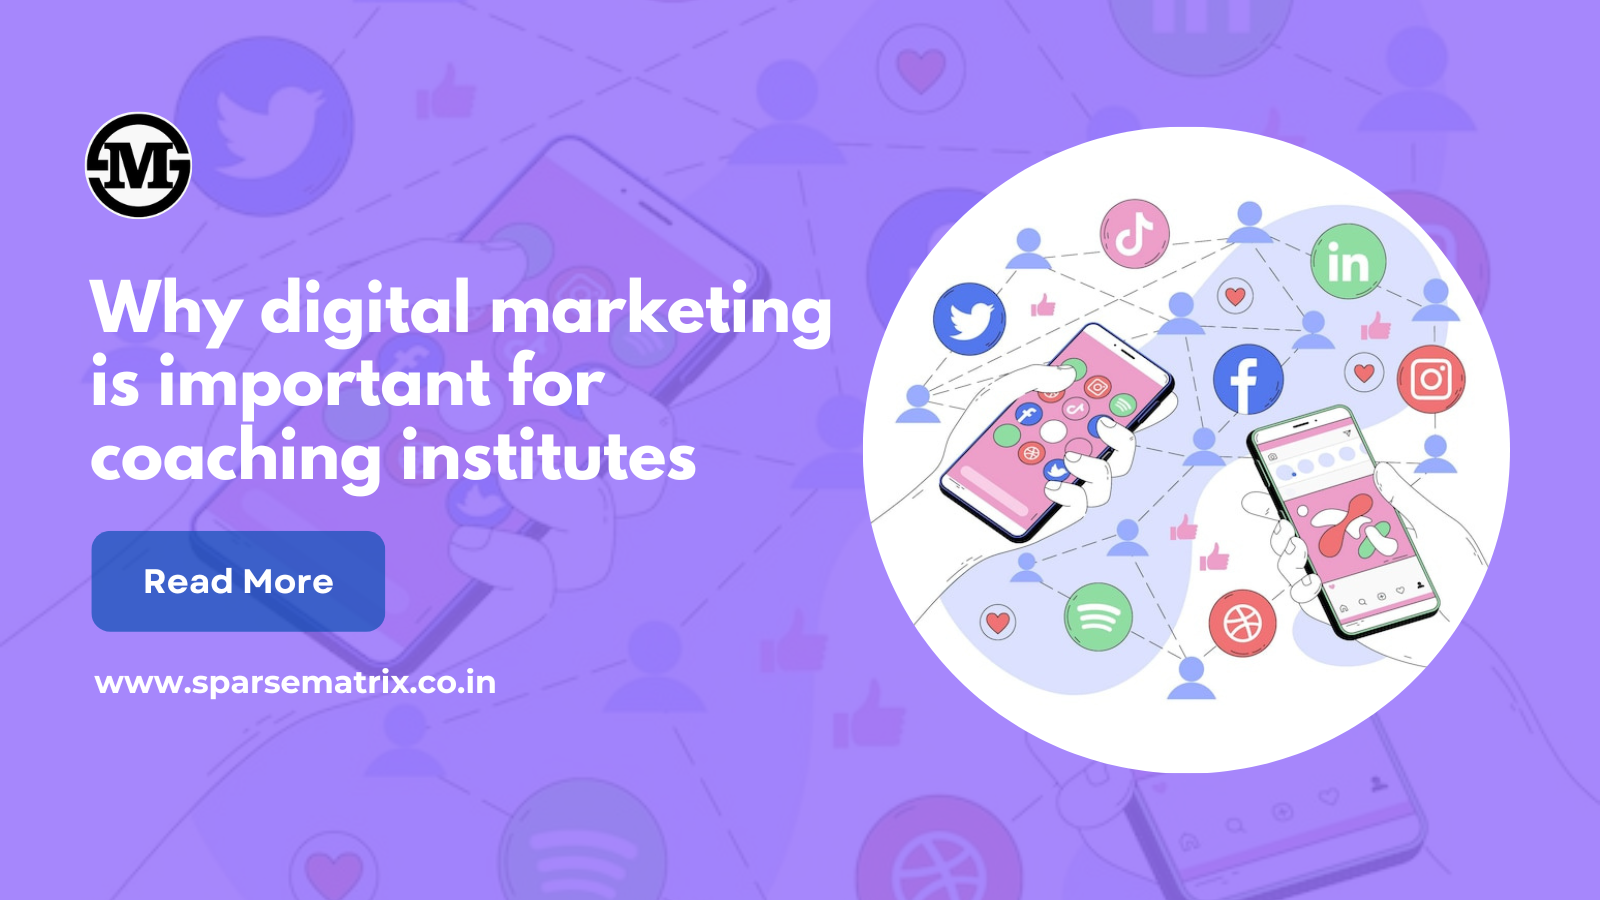 Why digital marketing is important for coaching institutes